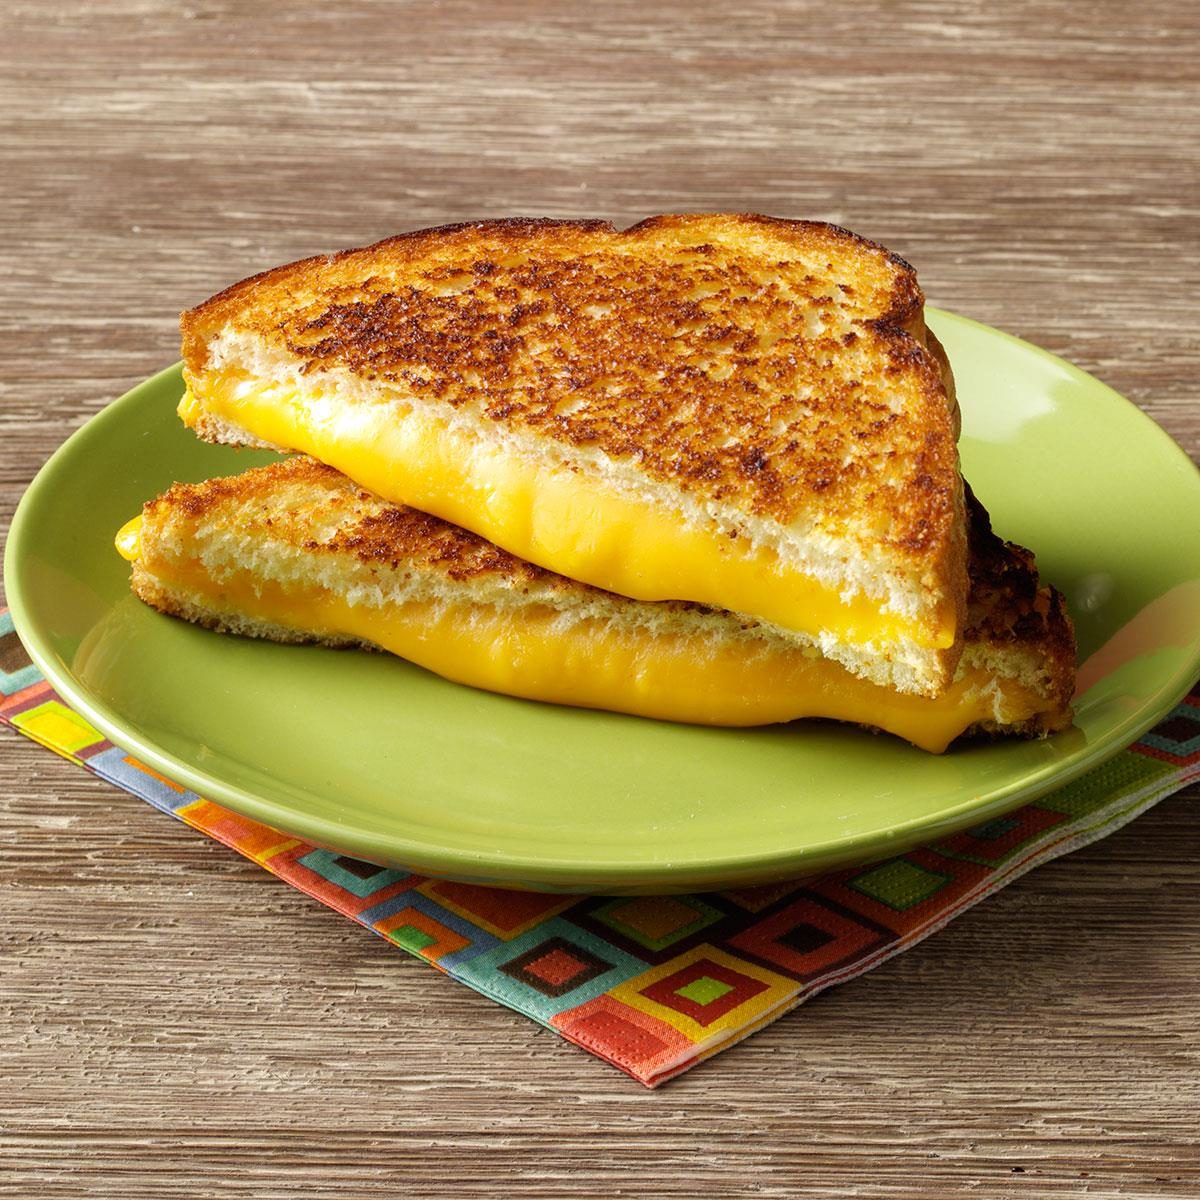 Super Grilled Cheese Sandwiches Recipe: How to Make It